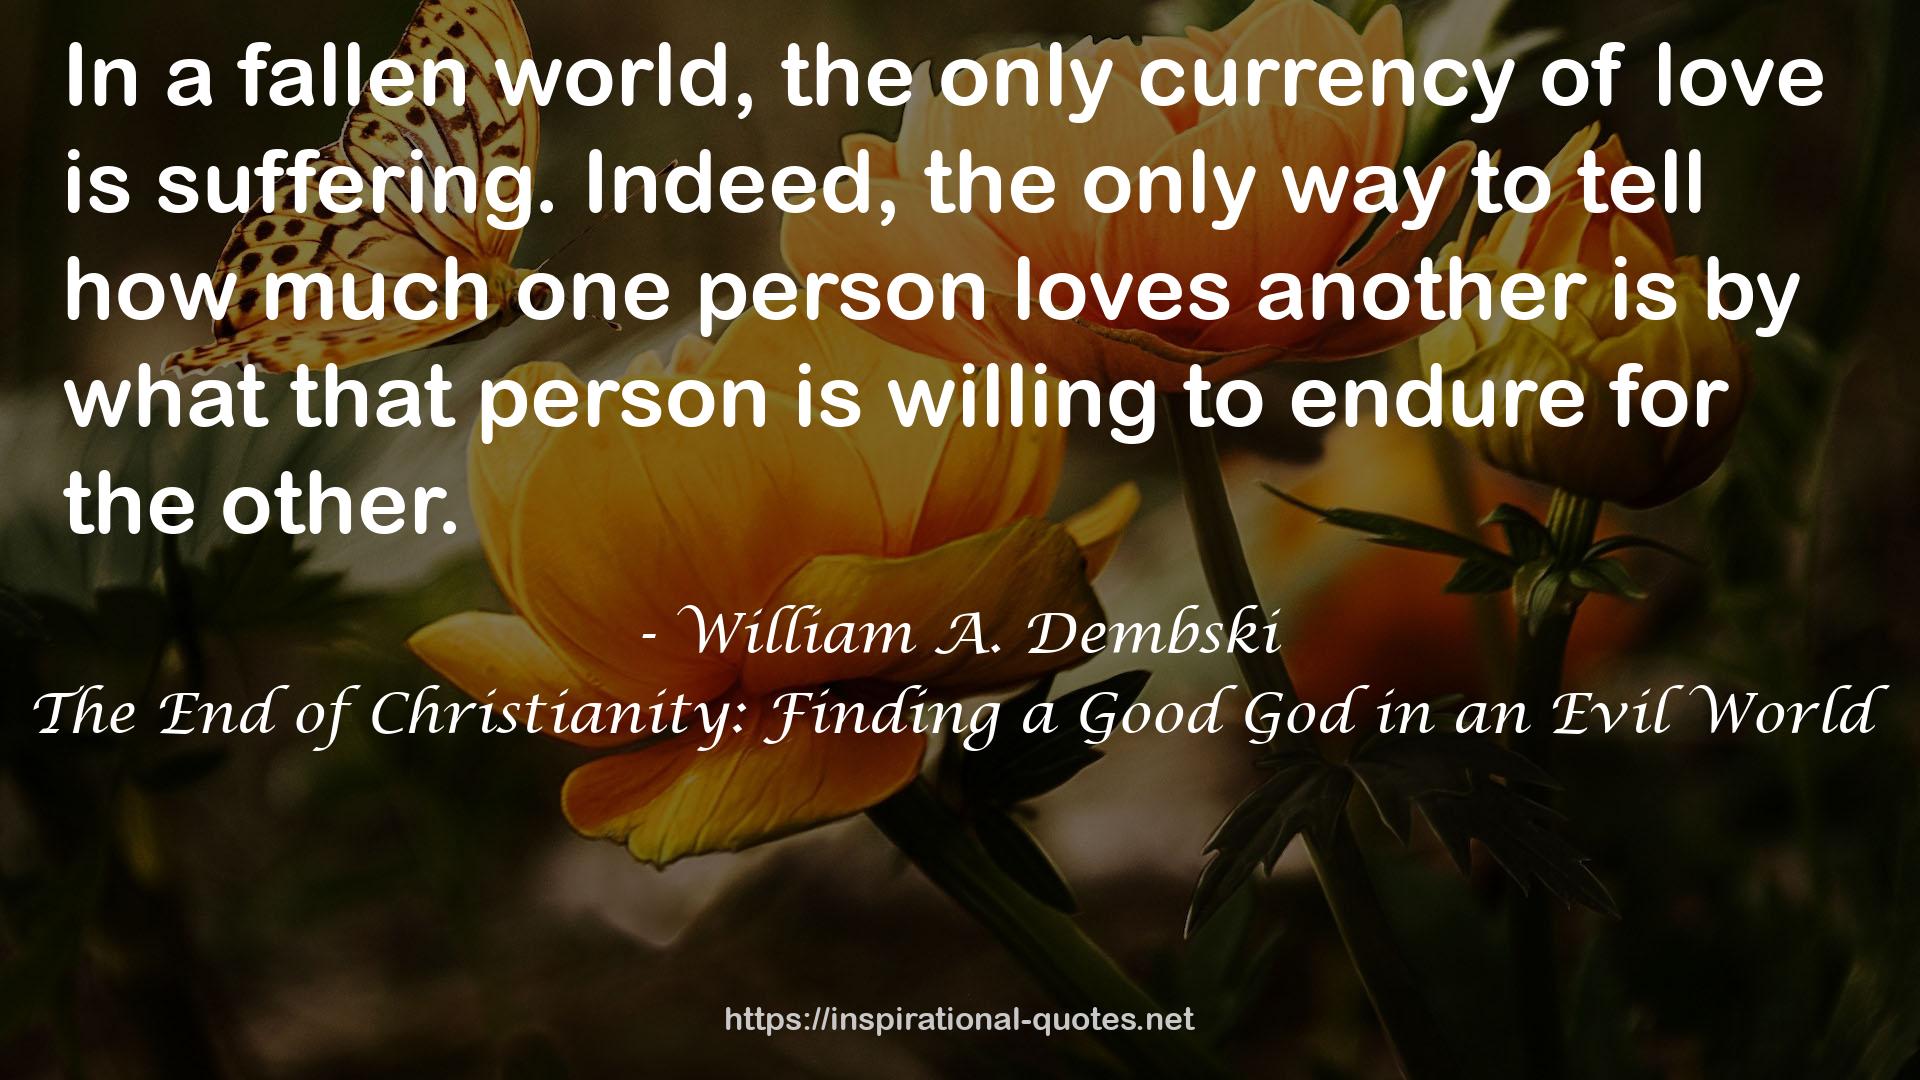 The End of Christianity: Finding a Good God in an Evil World QUOTES